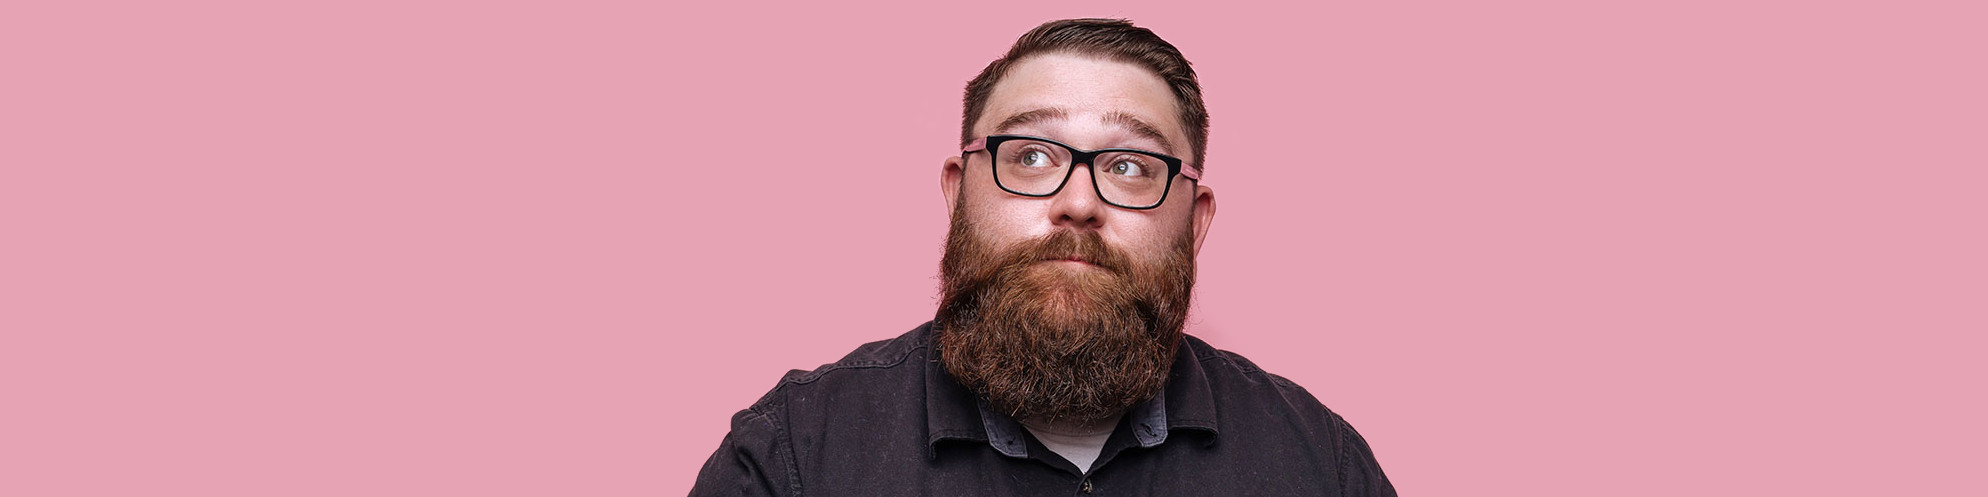 bearded man on a pink background